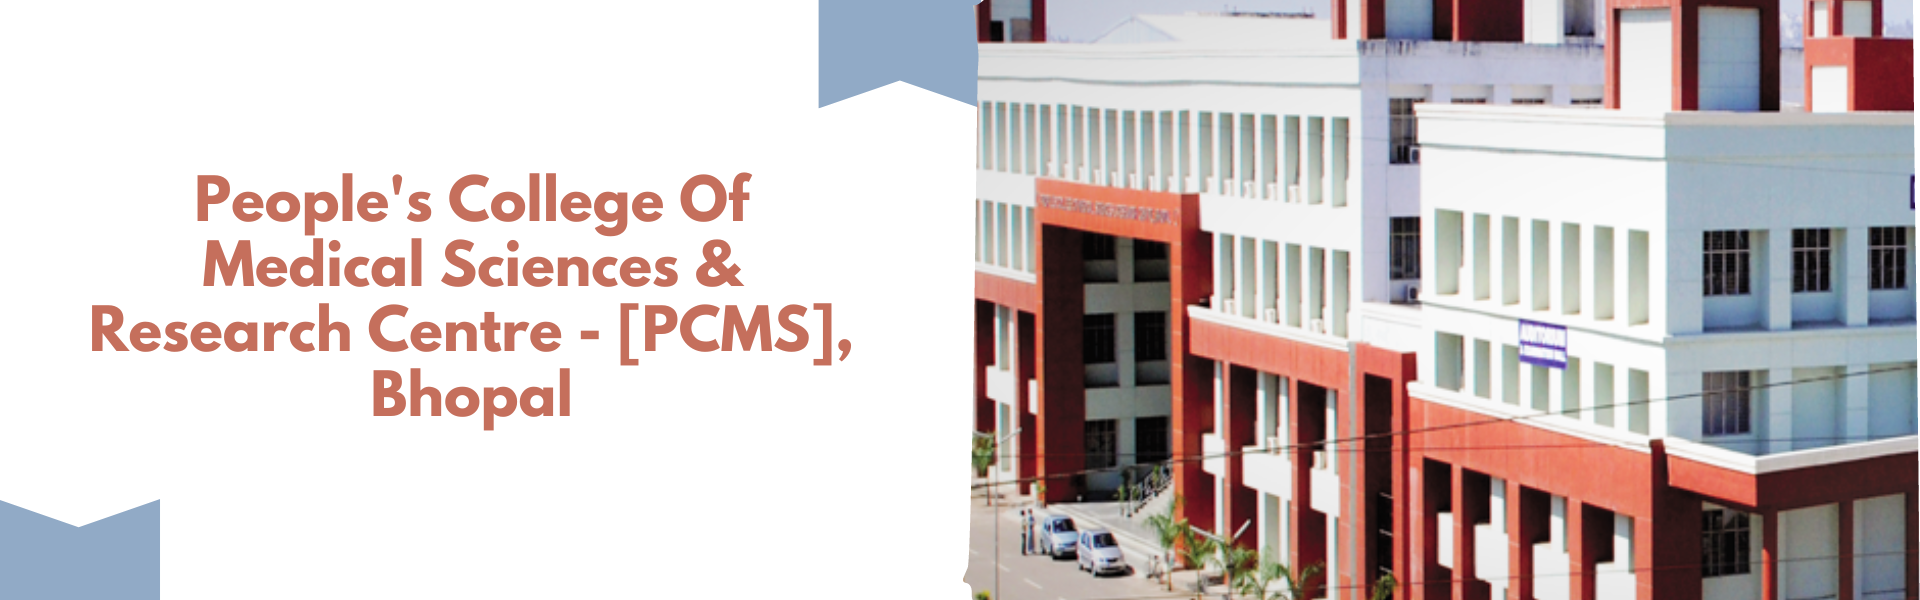 People's College Of Medical Sciences & Research Centre - [PCMS], Bhopal